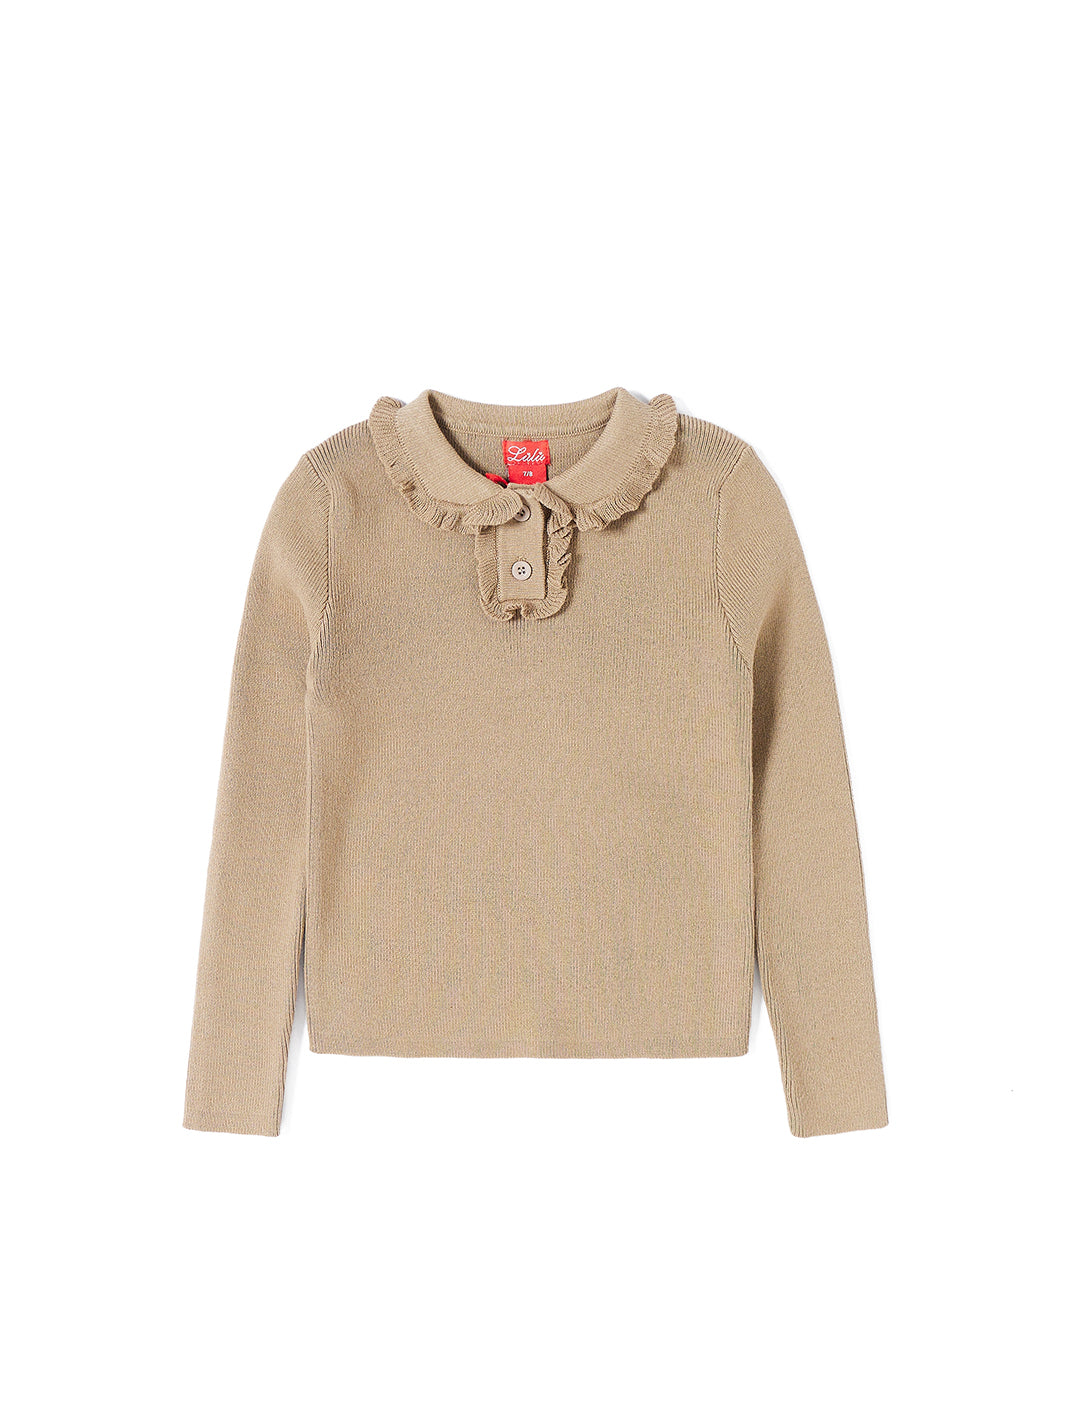 Solid Ruffle Collar Placket Sweater - Smoky Beige